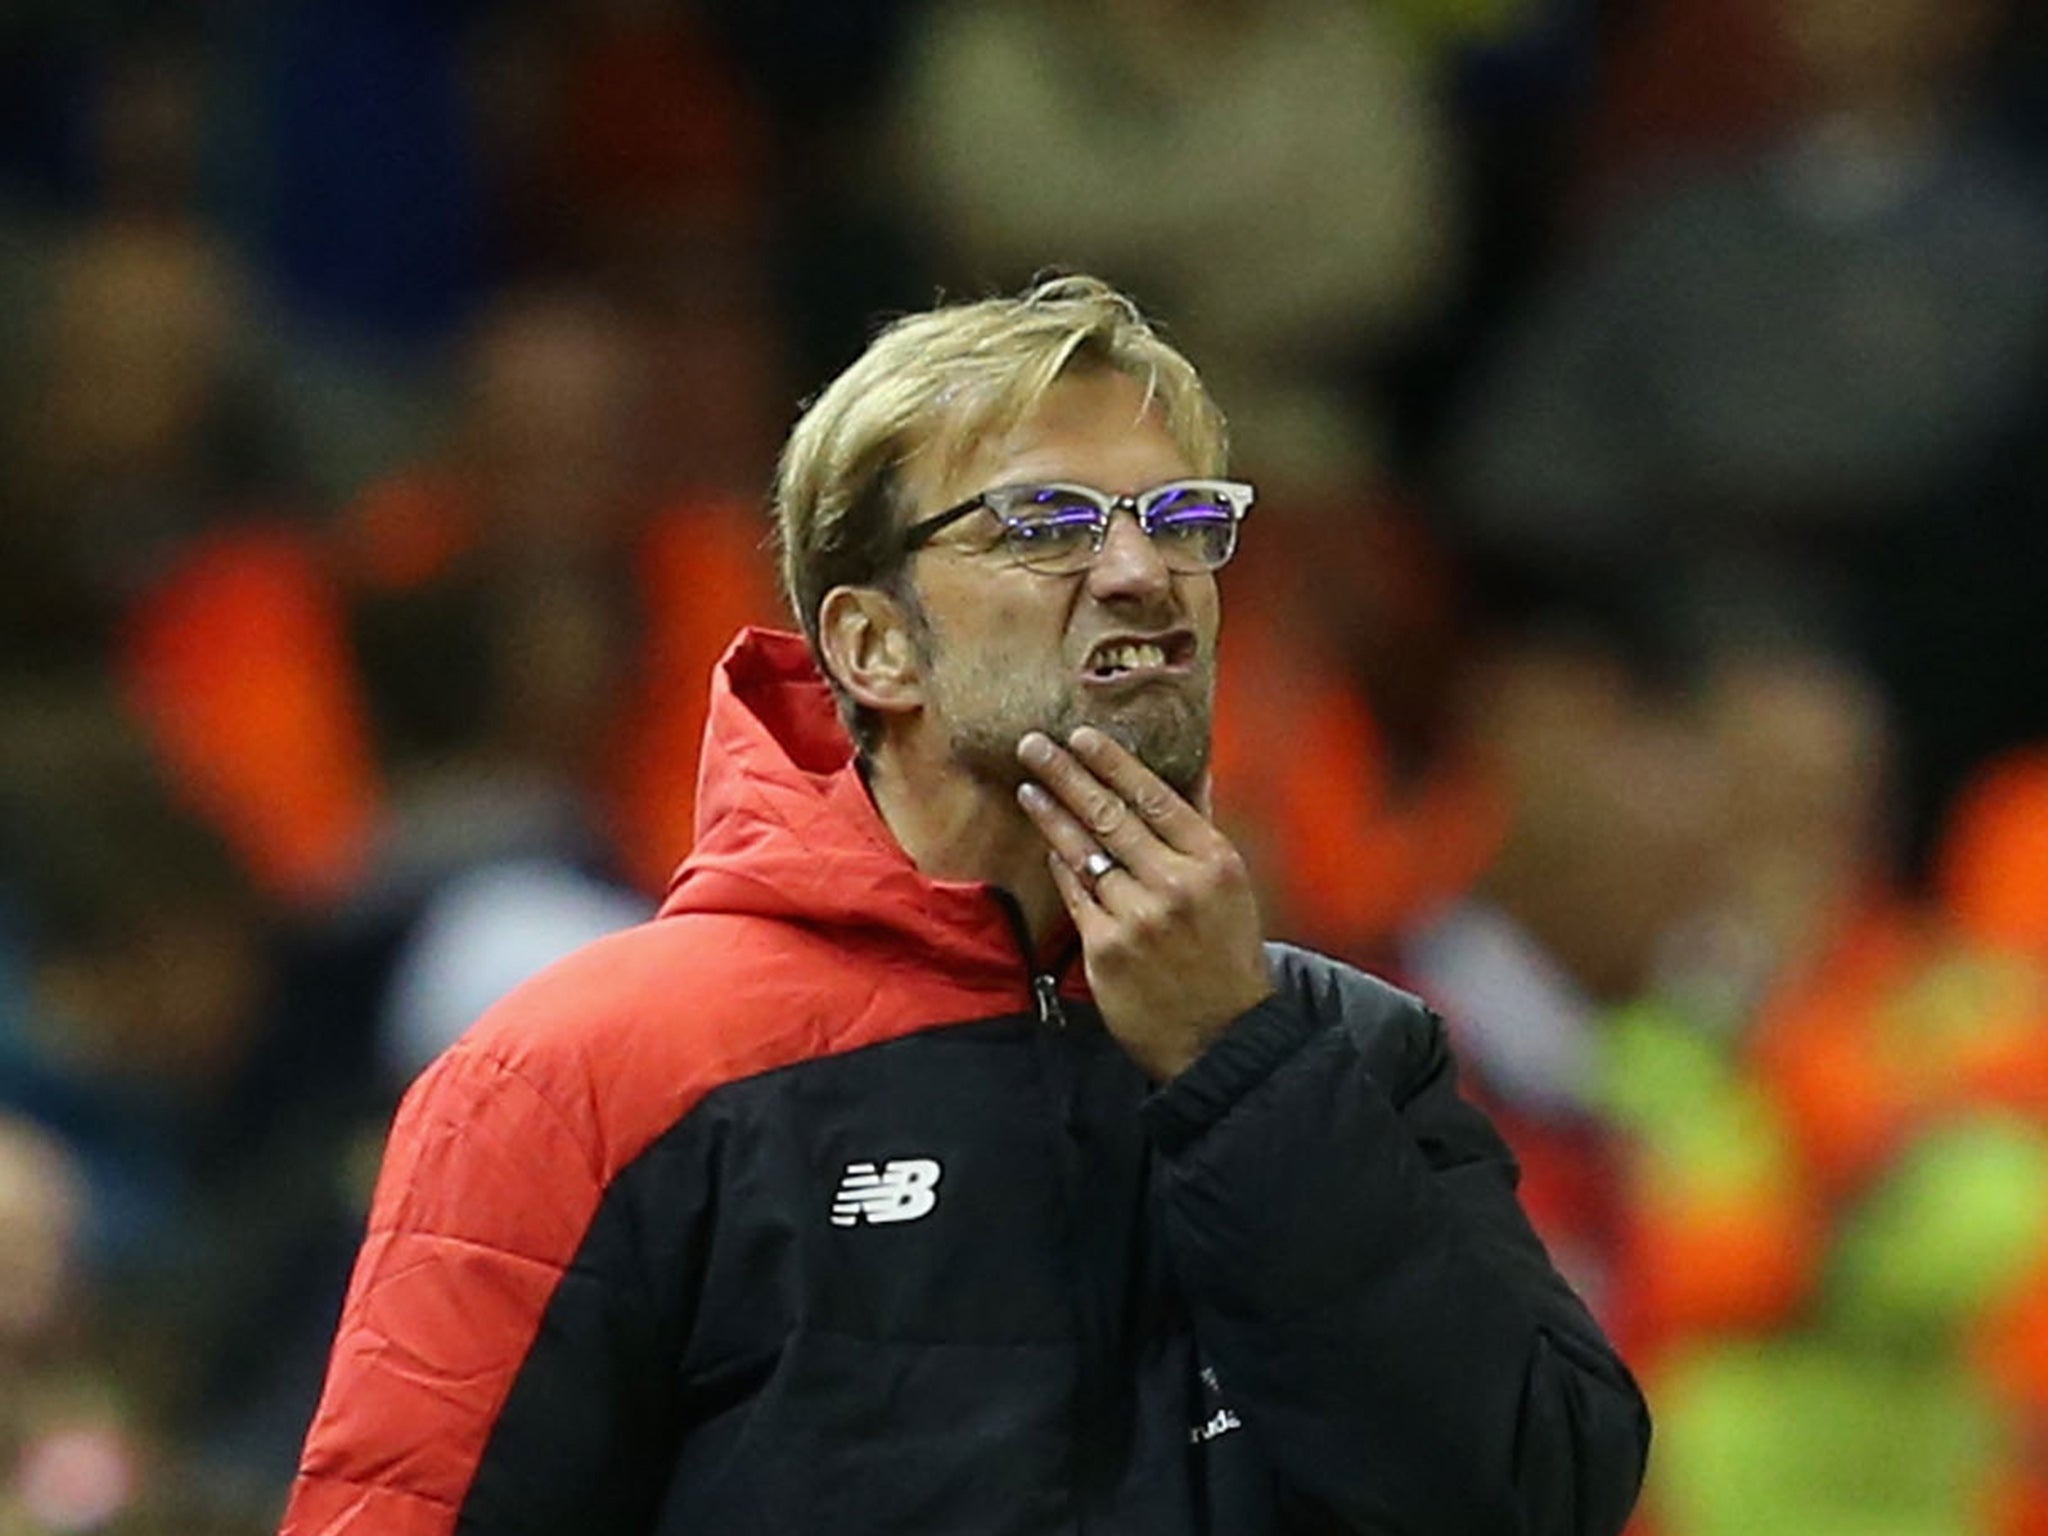 Jurgen Klopp looks on from the touchline at Anfield in the 1-1 draw with Southampton